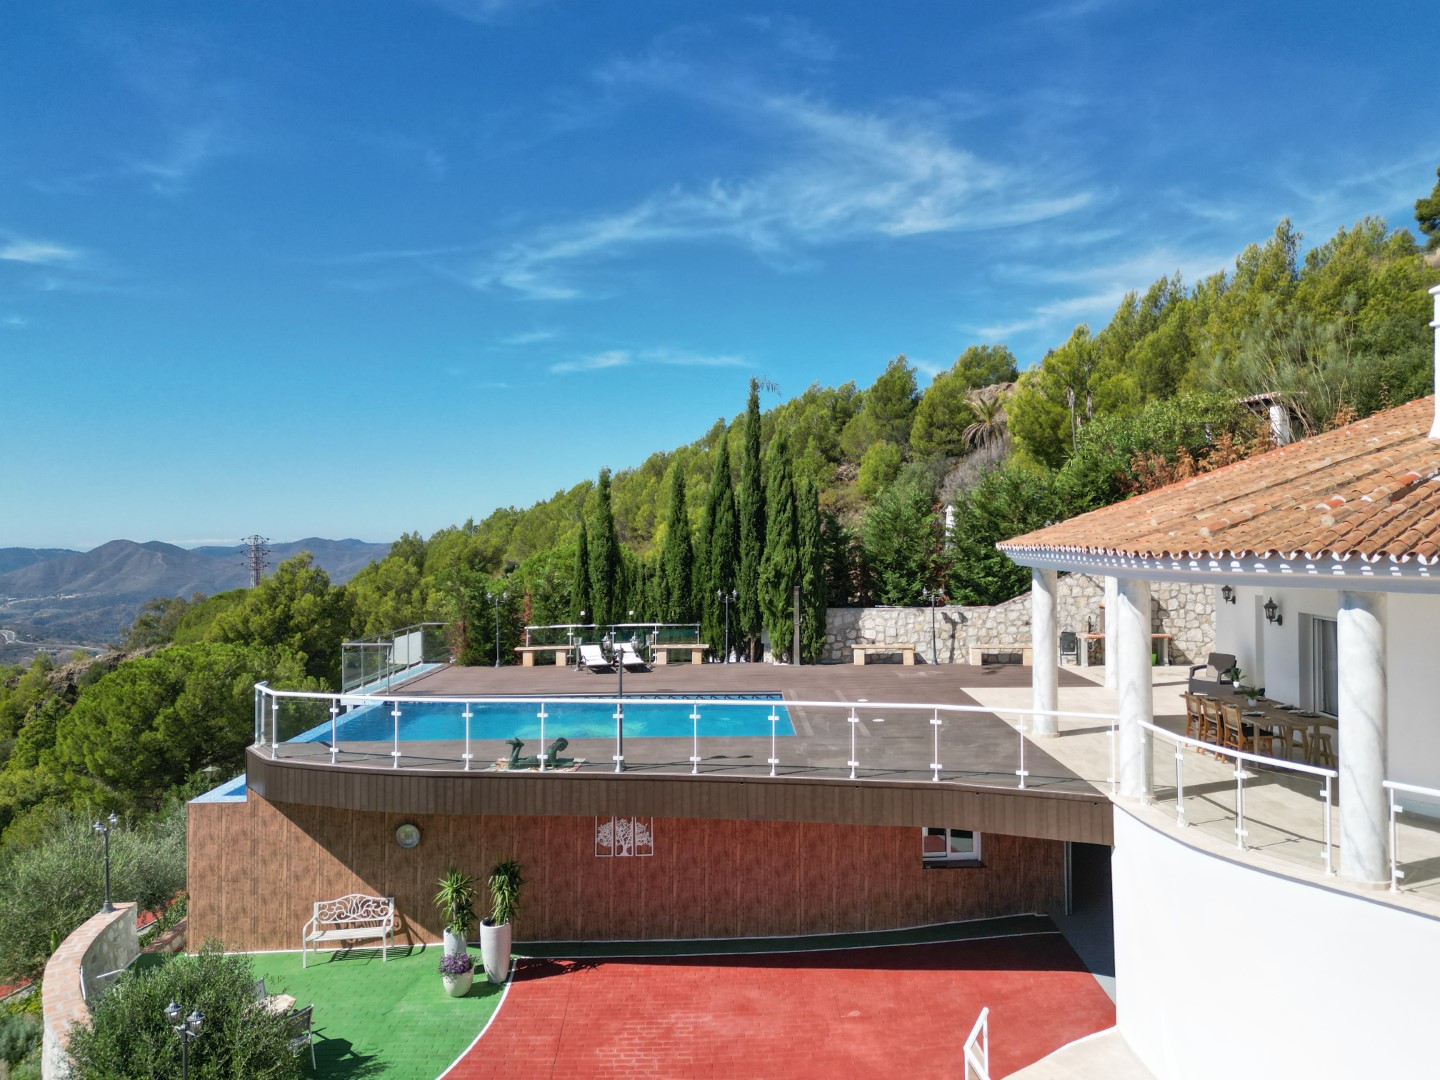 INDEPENDENT VILLA AND APARTMENT FOR SALE IN URB VALTOCADO MIJAS